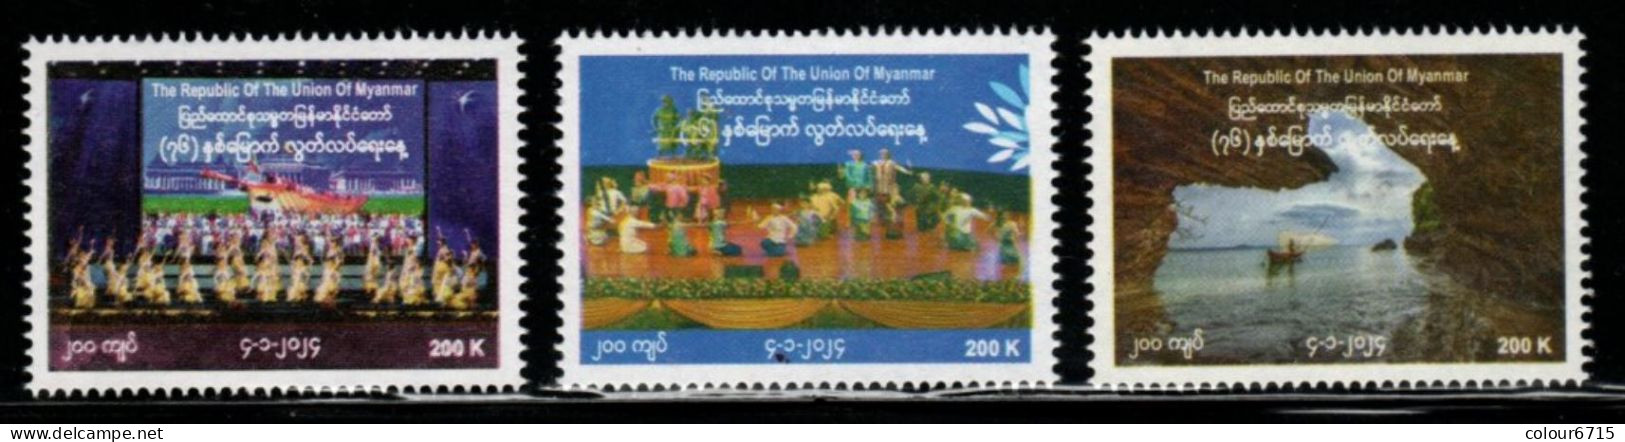 Myanmar 2024 The 76th Anniversary Of Independence Stamps 3v MNH - Myanmar (Burma 1948-...)